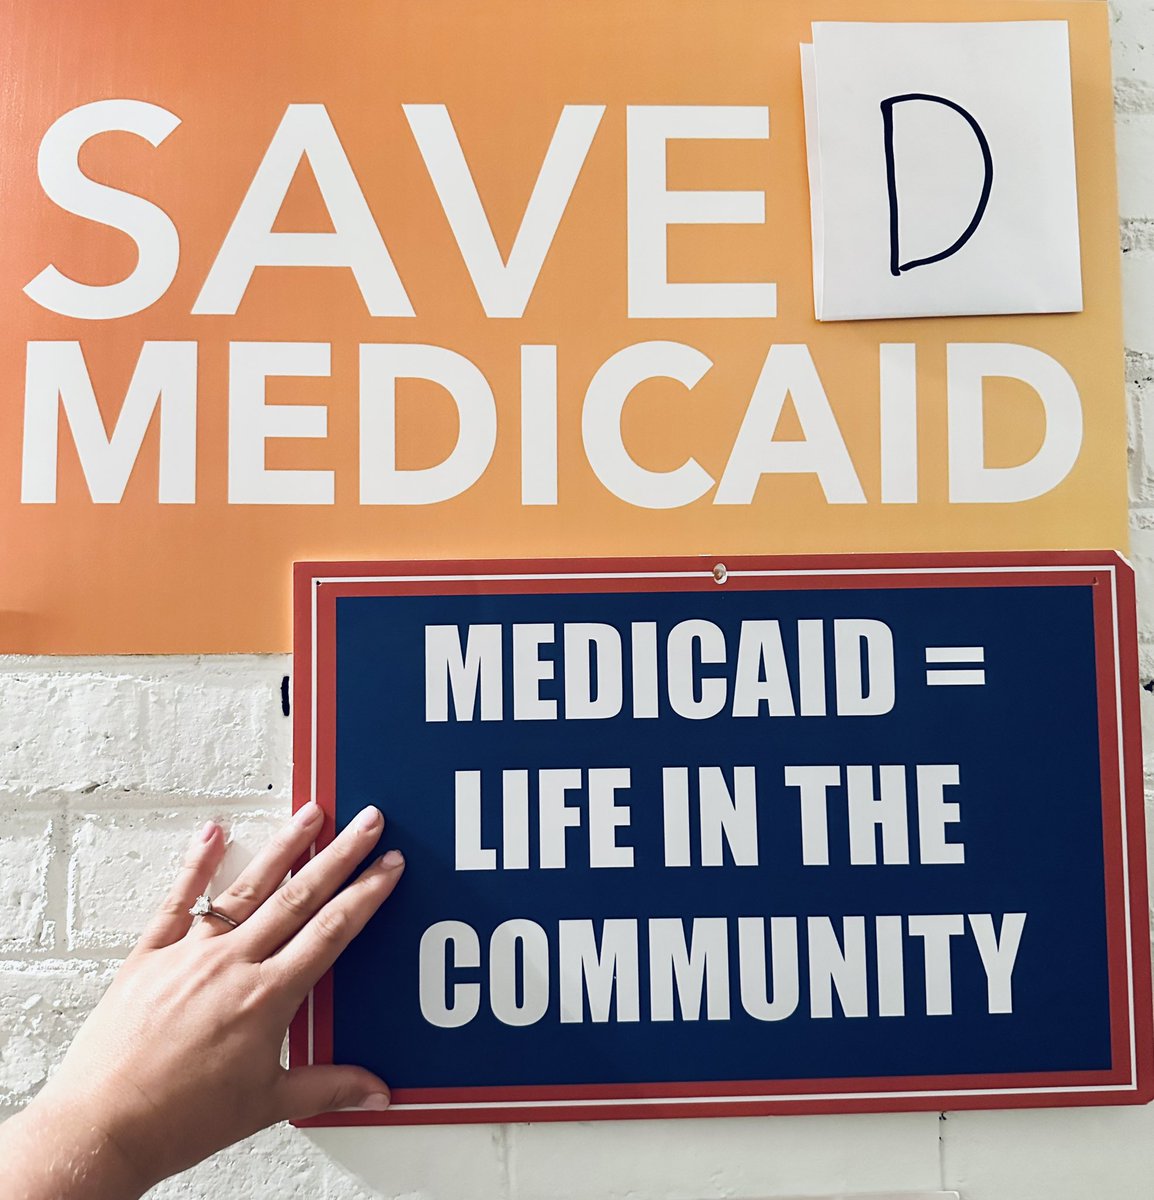 Together we did that! 

Look, the #FiscalResponsibilityAct is FAR from perfect, but I am thrilled that #Medicaid cuts were left out of the bill to avoid #Default 

Now onto halting the purge from the unwinding and expanding the program #CareCantWait